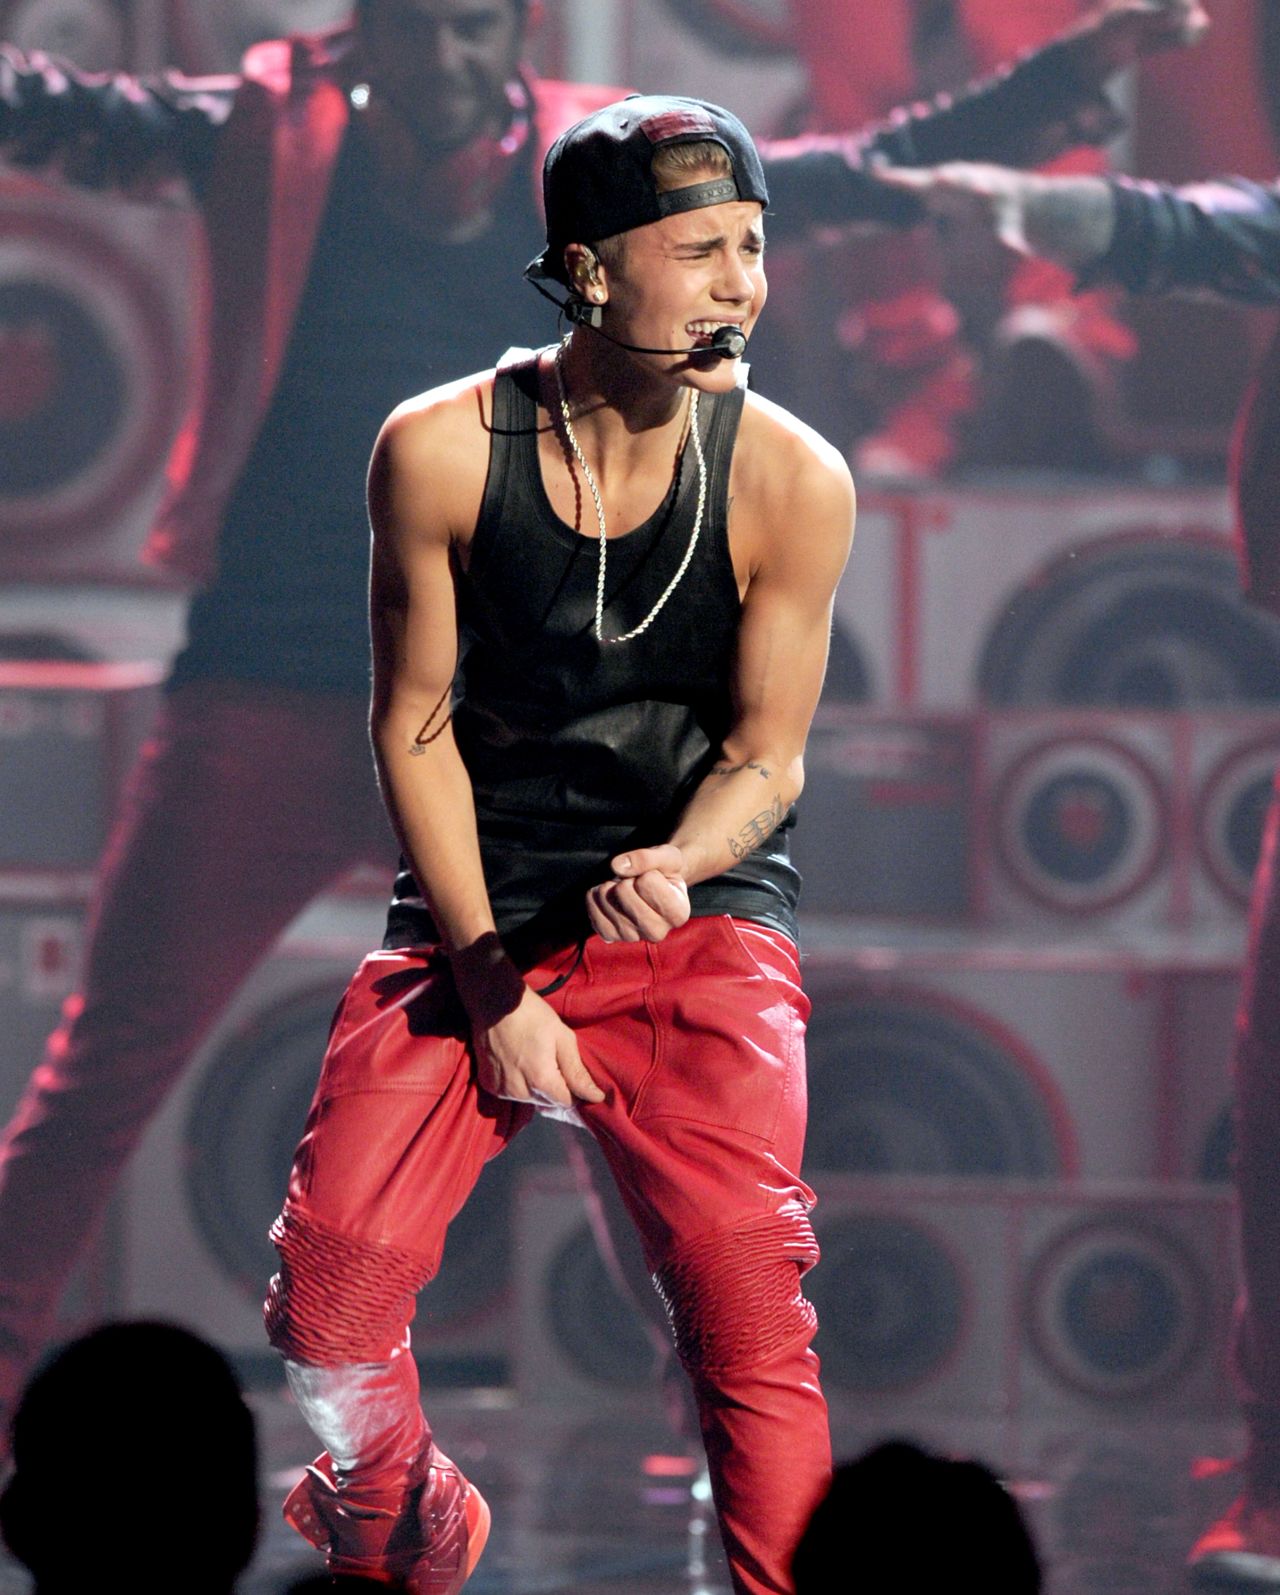 Bieber cleans up at the American Music Awards in November, but <a href="http://marquee.blogs.cnn.com/2012/12/06/grammy-snubs-bieber-gets-the-cold-shoulder/">the young artist is left out completely</a> when the Grammy nominations are announced a few weeks later. Add <a href="http://www.cnn.com/2012/12/13/us/justin-bieber-murder-plot">an alleged murder plot</a> to the mix, and it's fair to say December 2012 wasn't the best month for the Biebs. 